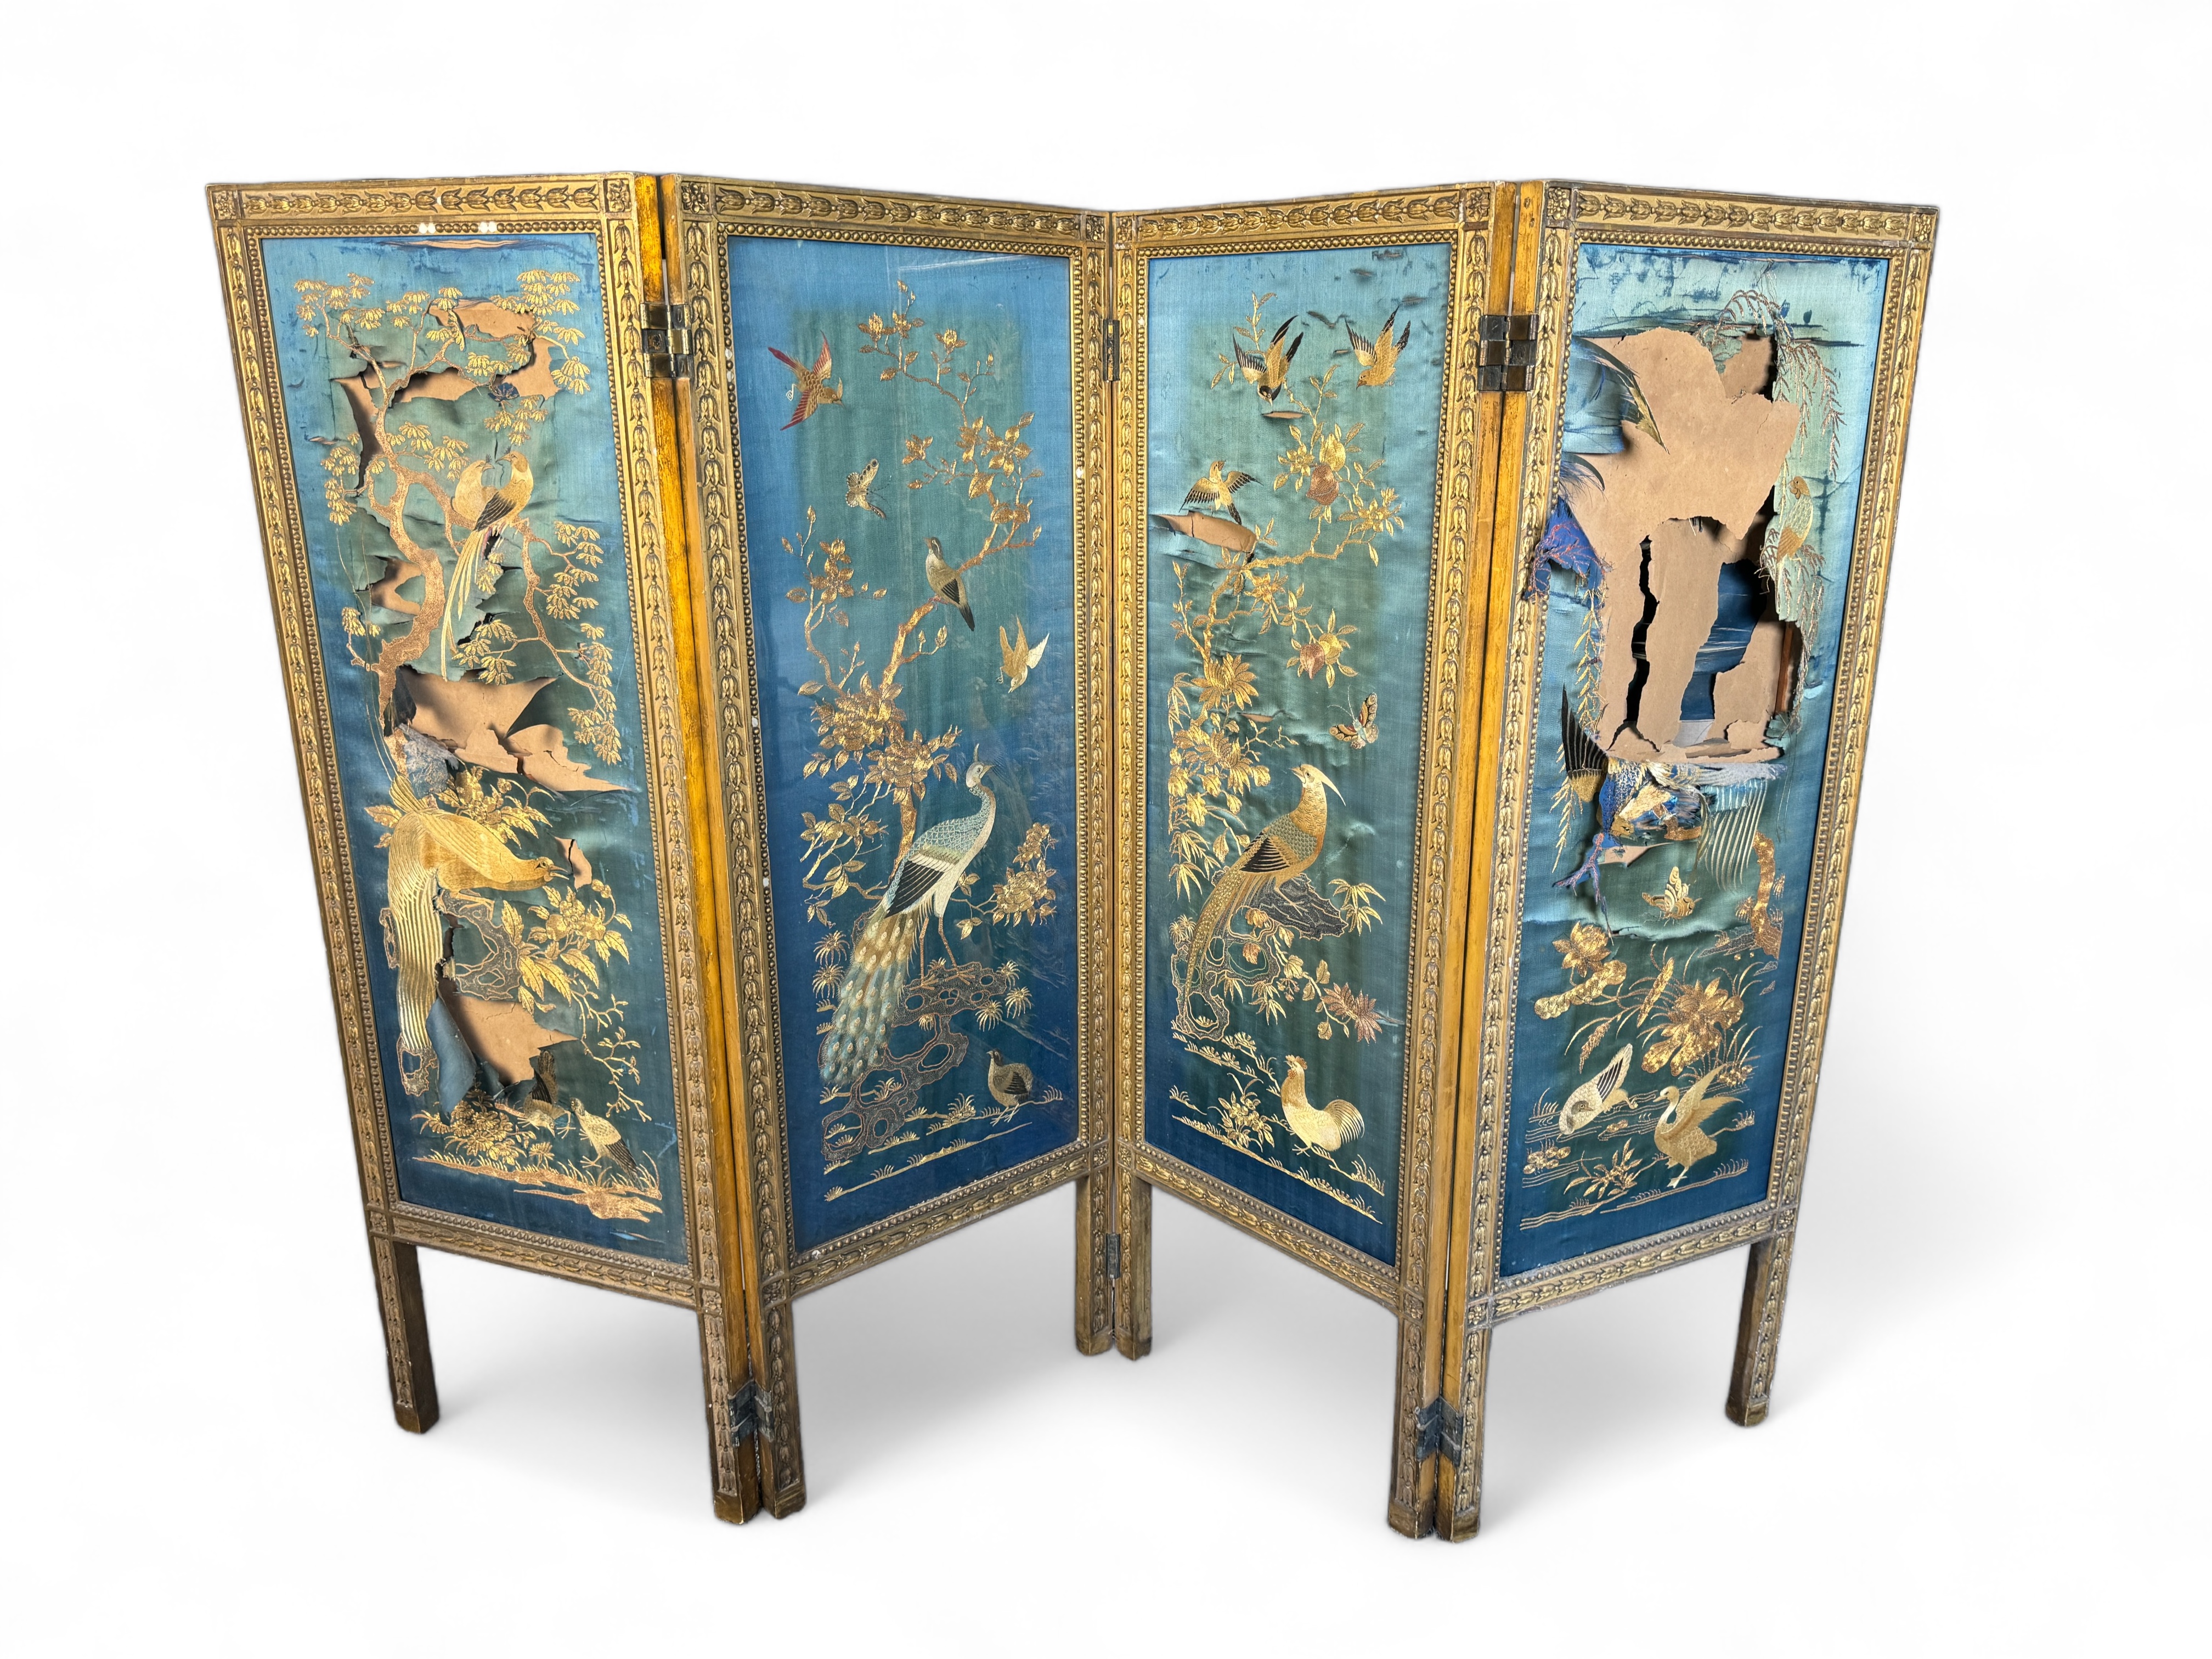 A 19th century French Louis XVI style four fold giltwood screen with panels of Chinese silk embroide